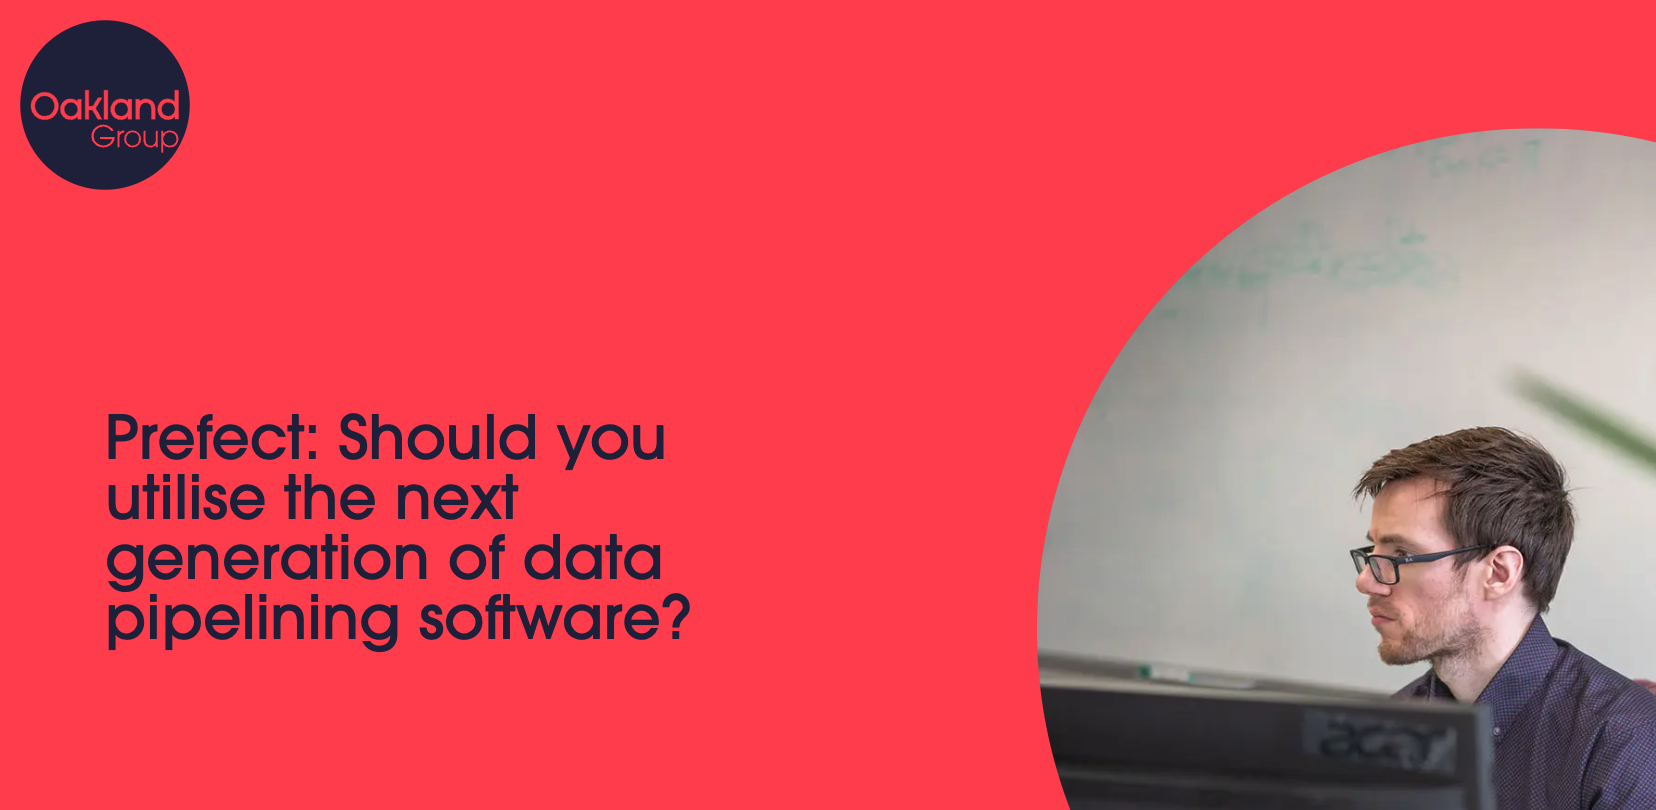 Prefect: Should you utilise the next generation of data pipelining software?